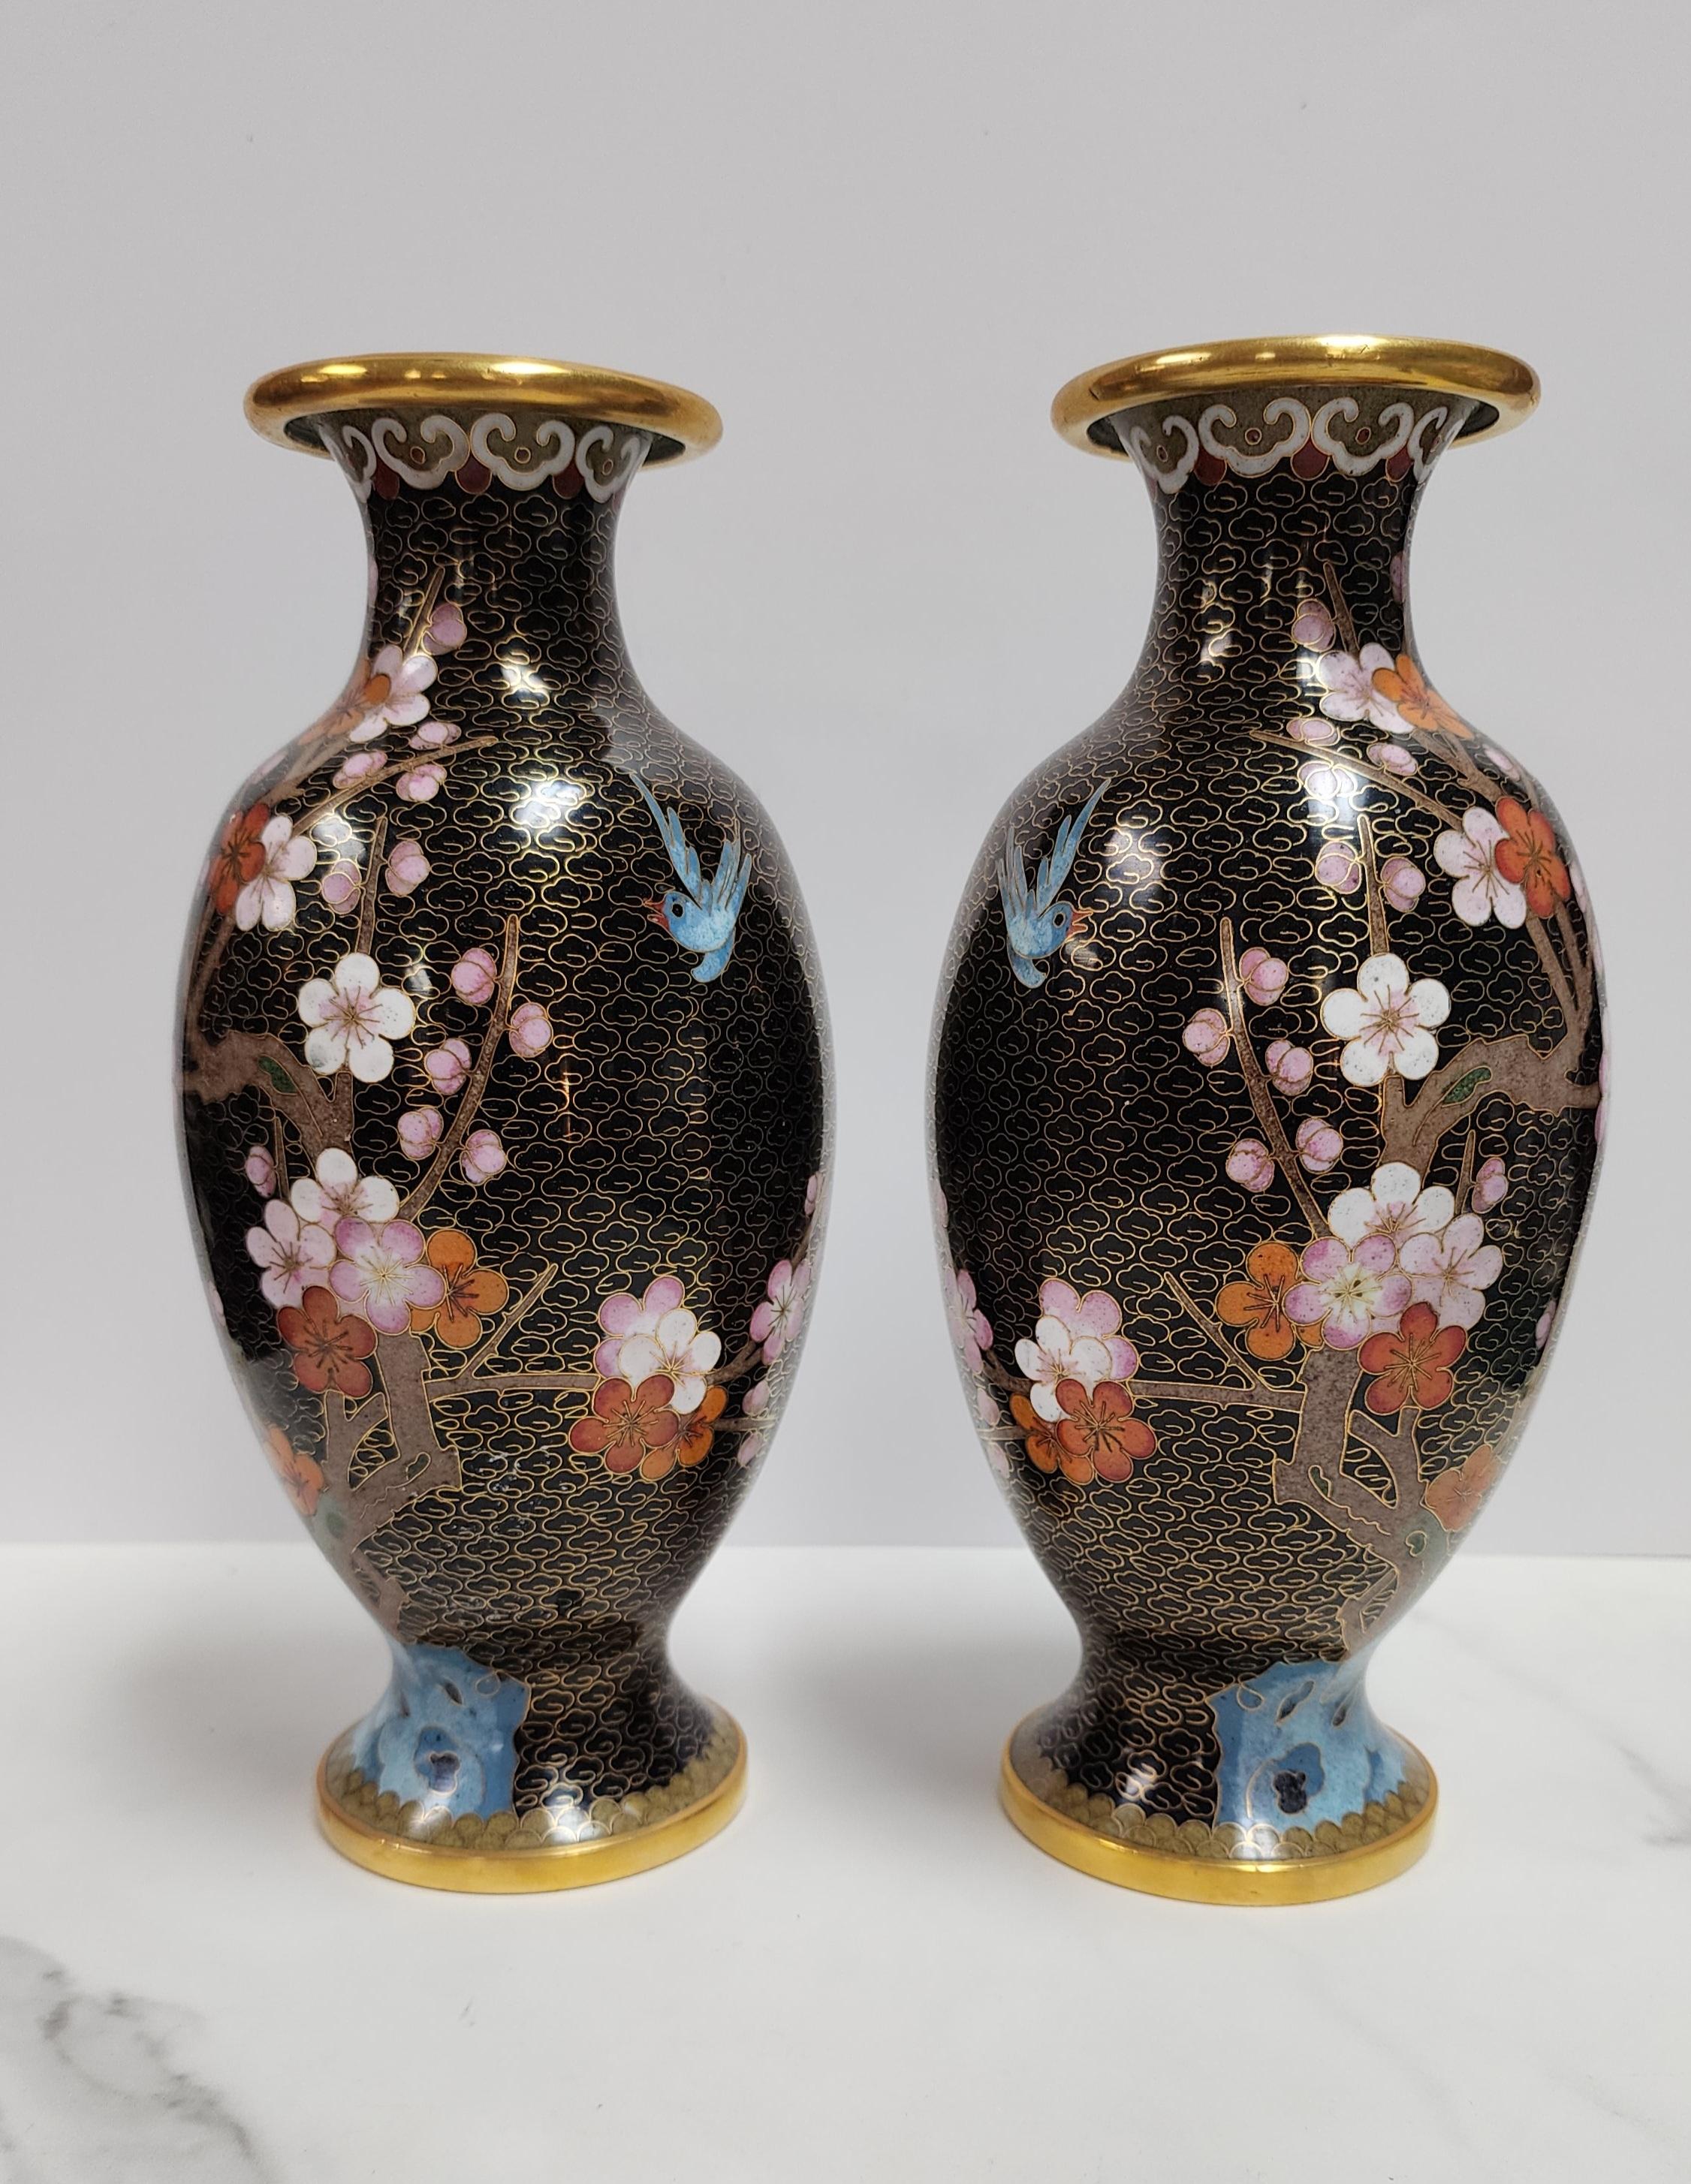 Pair of Mirrored Chinese Cloisonne Enamel Vase with Flower and Bird Motif For Sale 7